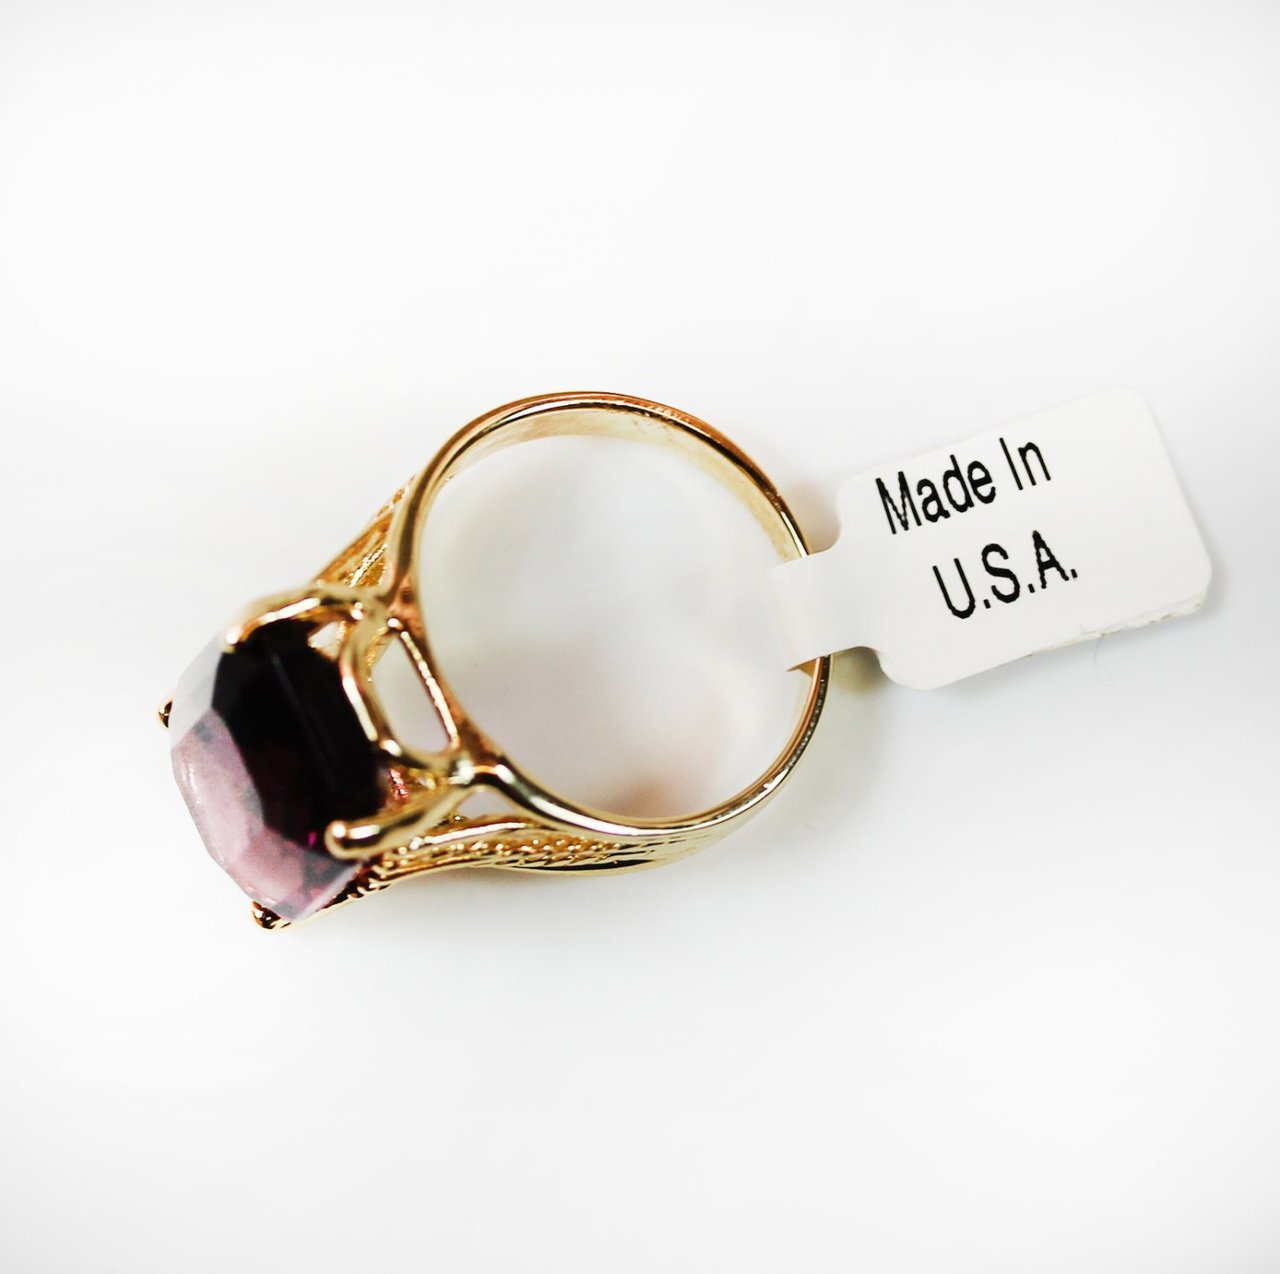 Vintage 1970s 18k Gold Electroplated Cocktail Ring Amethyst Austrian Crystal Made in USA